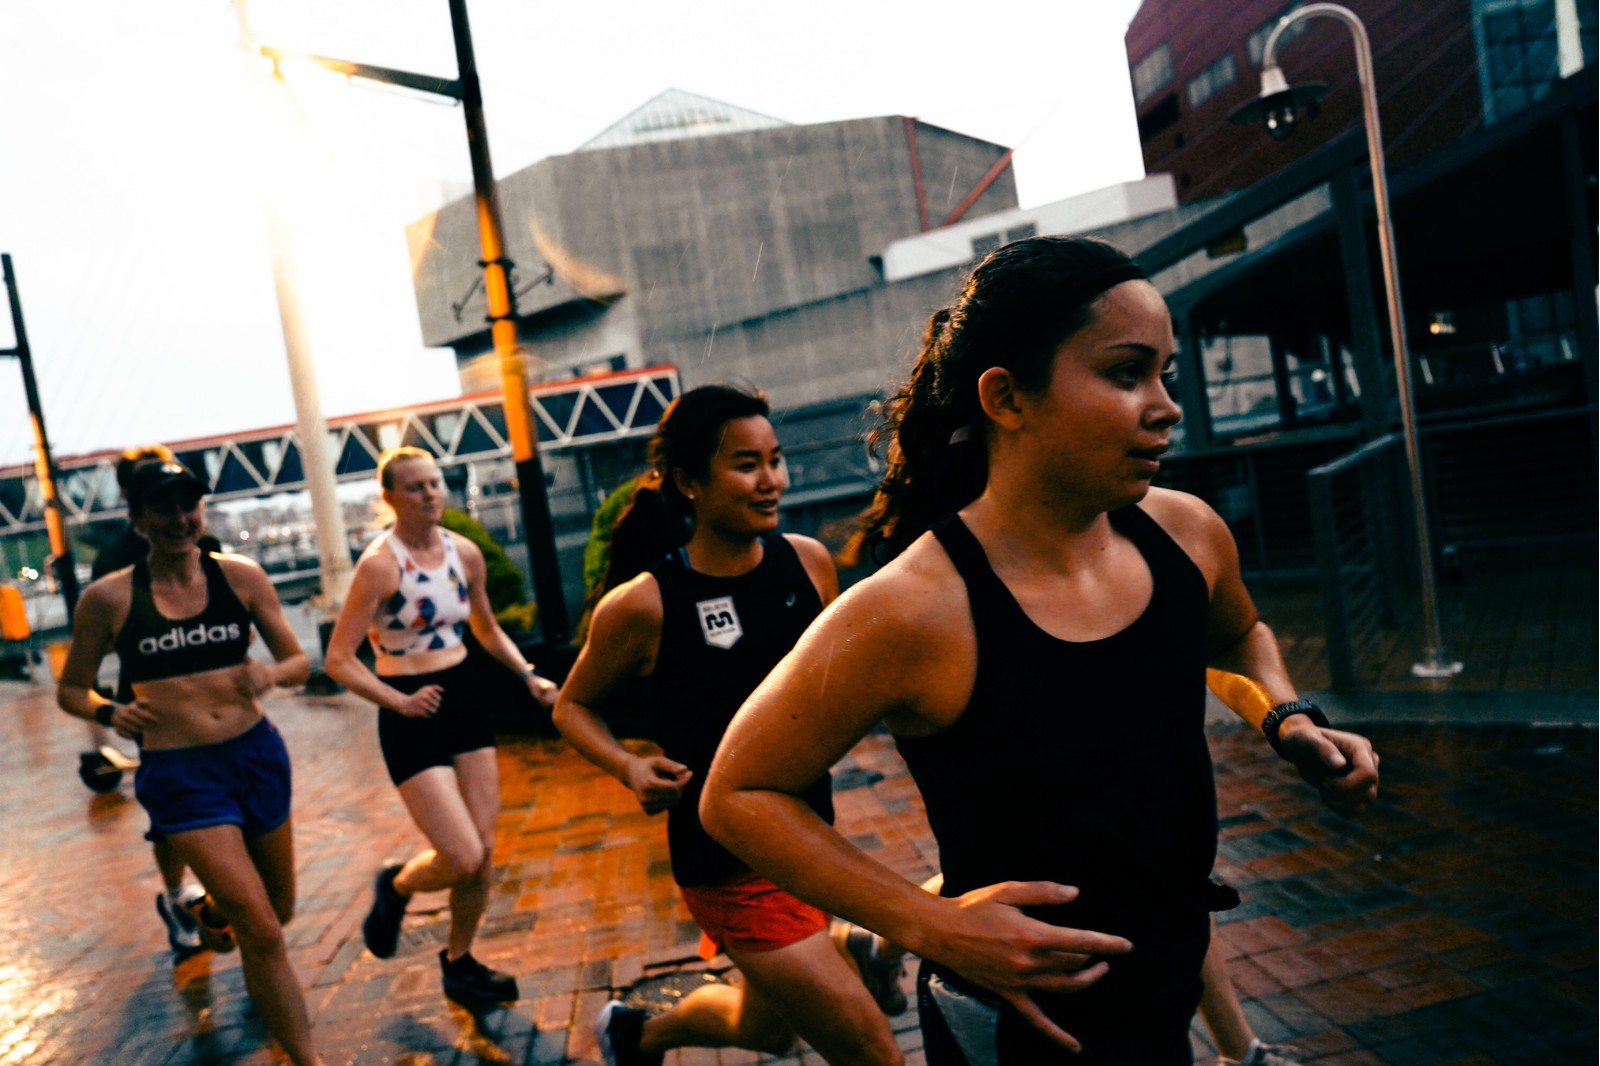 group of women running in a city